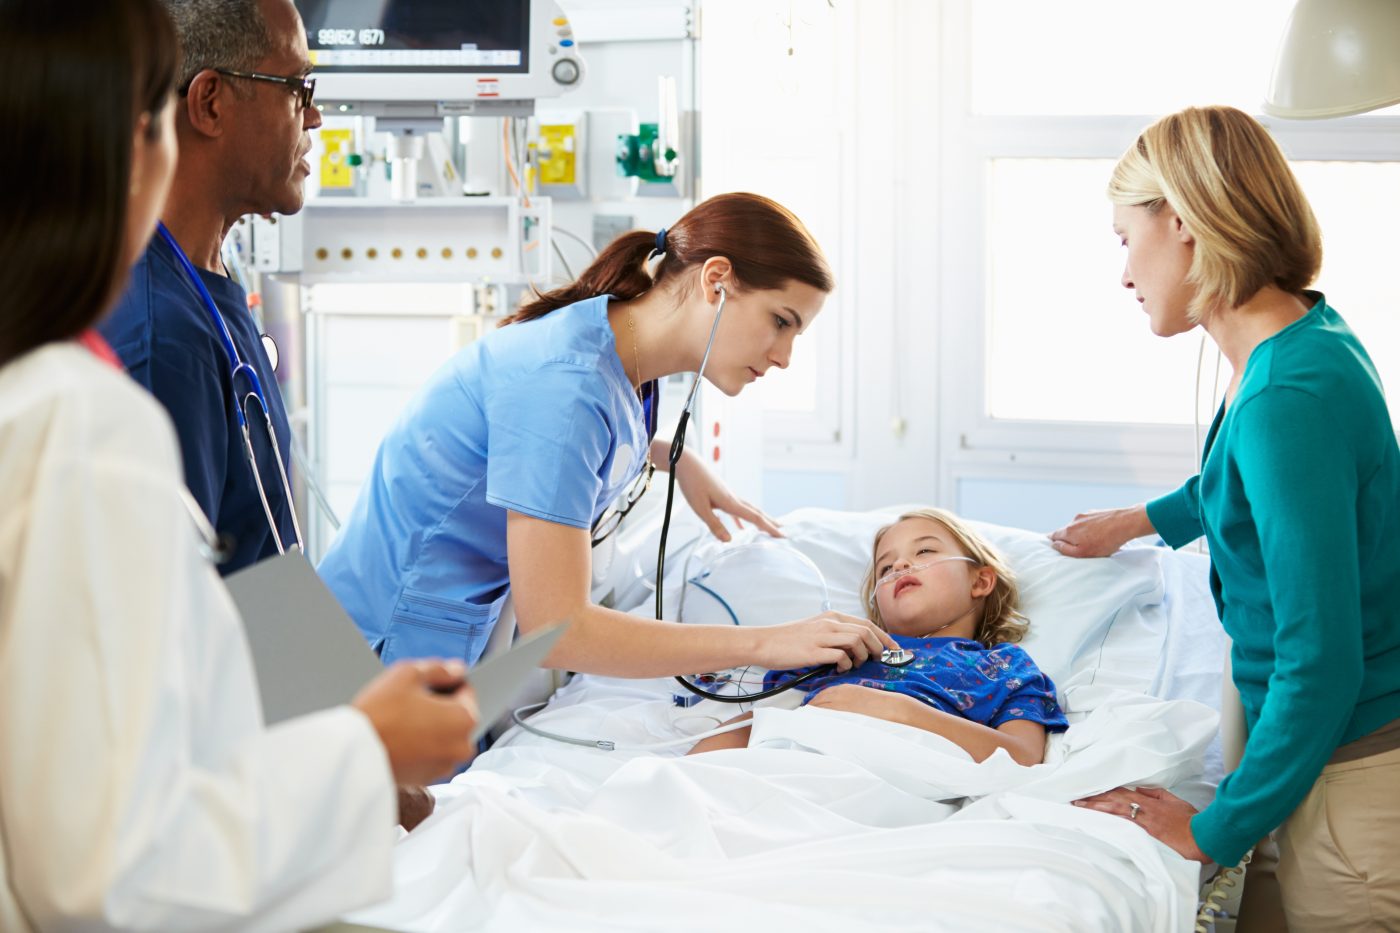 Young Children with Type 1 Diabetes Have an Extremely Increased Risk of Hospitalization